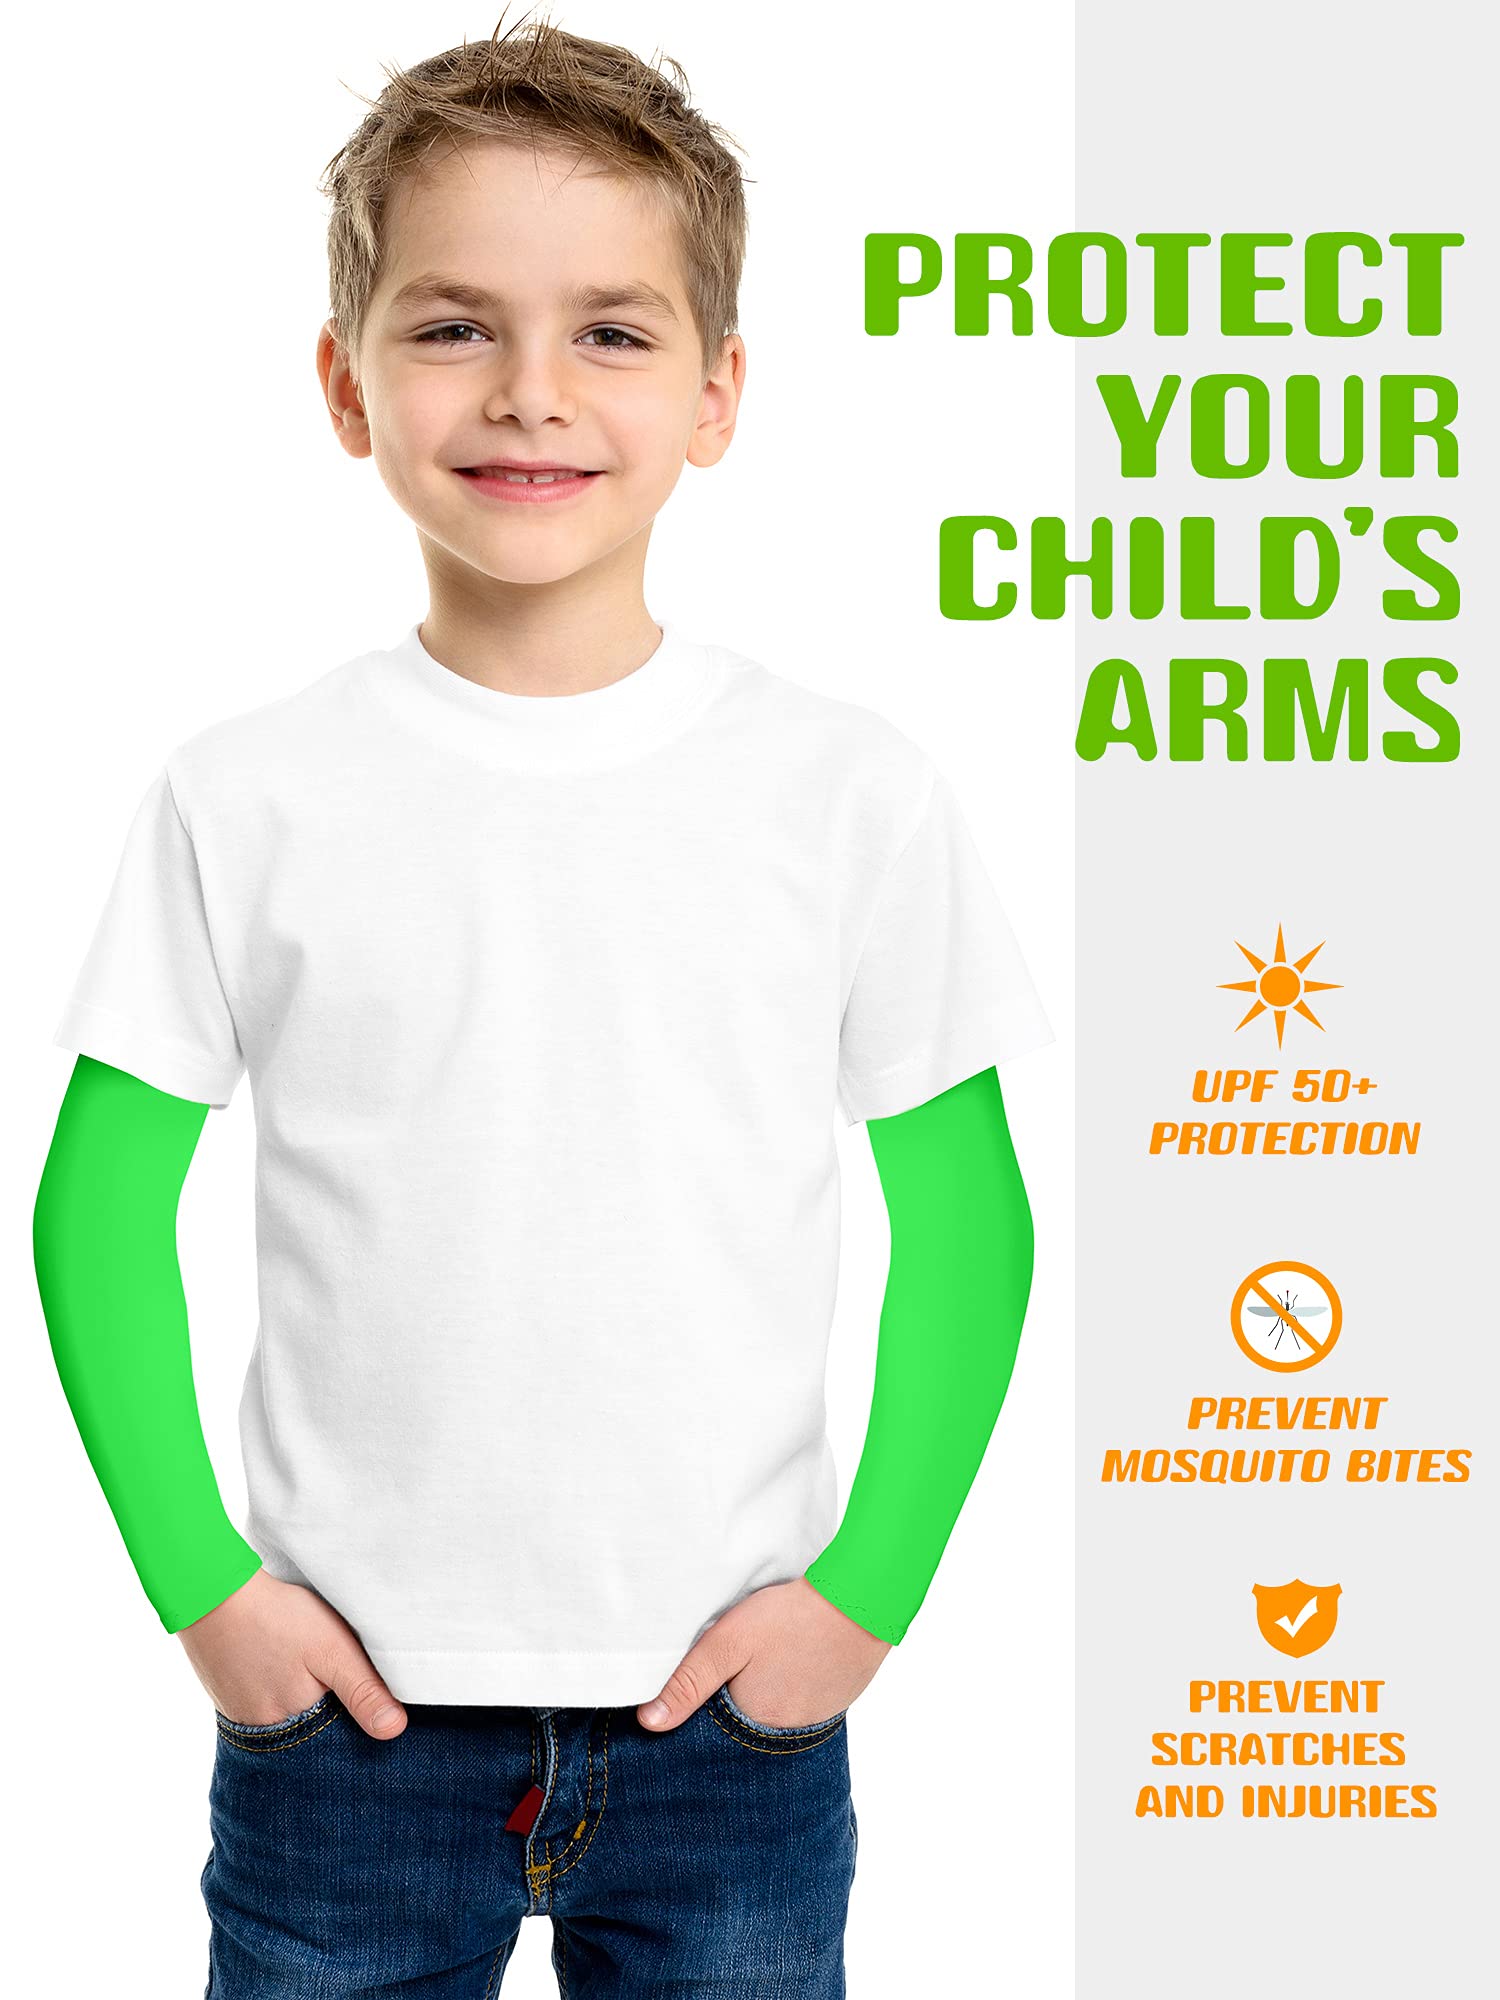 Geyoga 10 Pairs Kids Arm Sleeves Sun Protection Cooling UV Protection Sleeves Anti-slip Ice Silk Arm Covers for Boys and Girls (Mixed Colors, M Size)